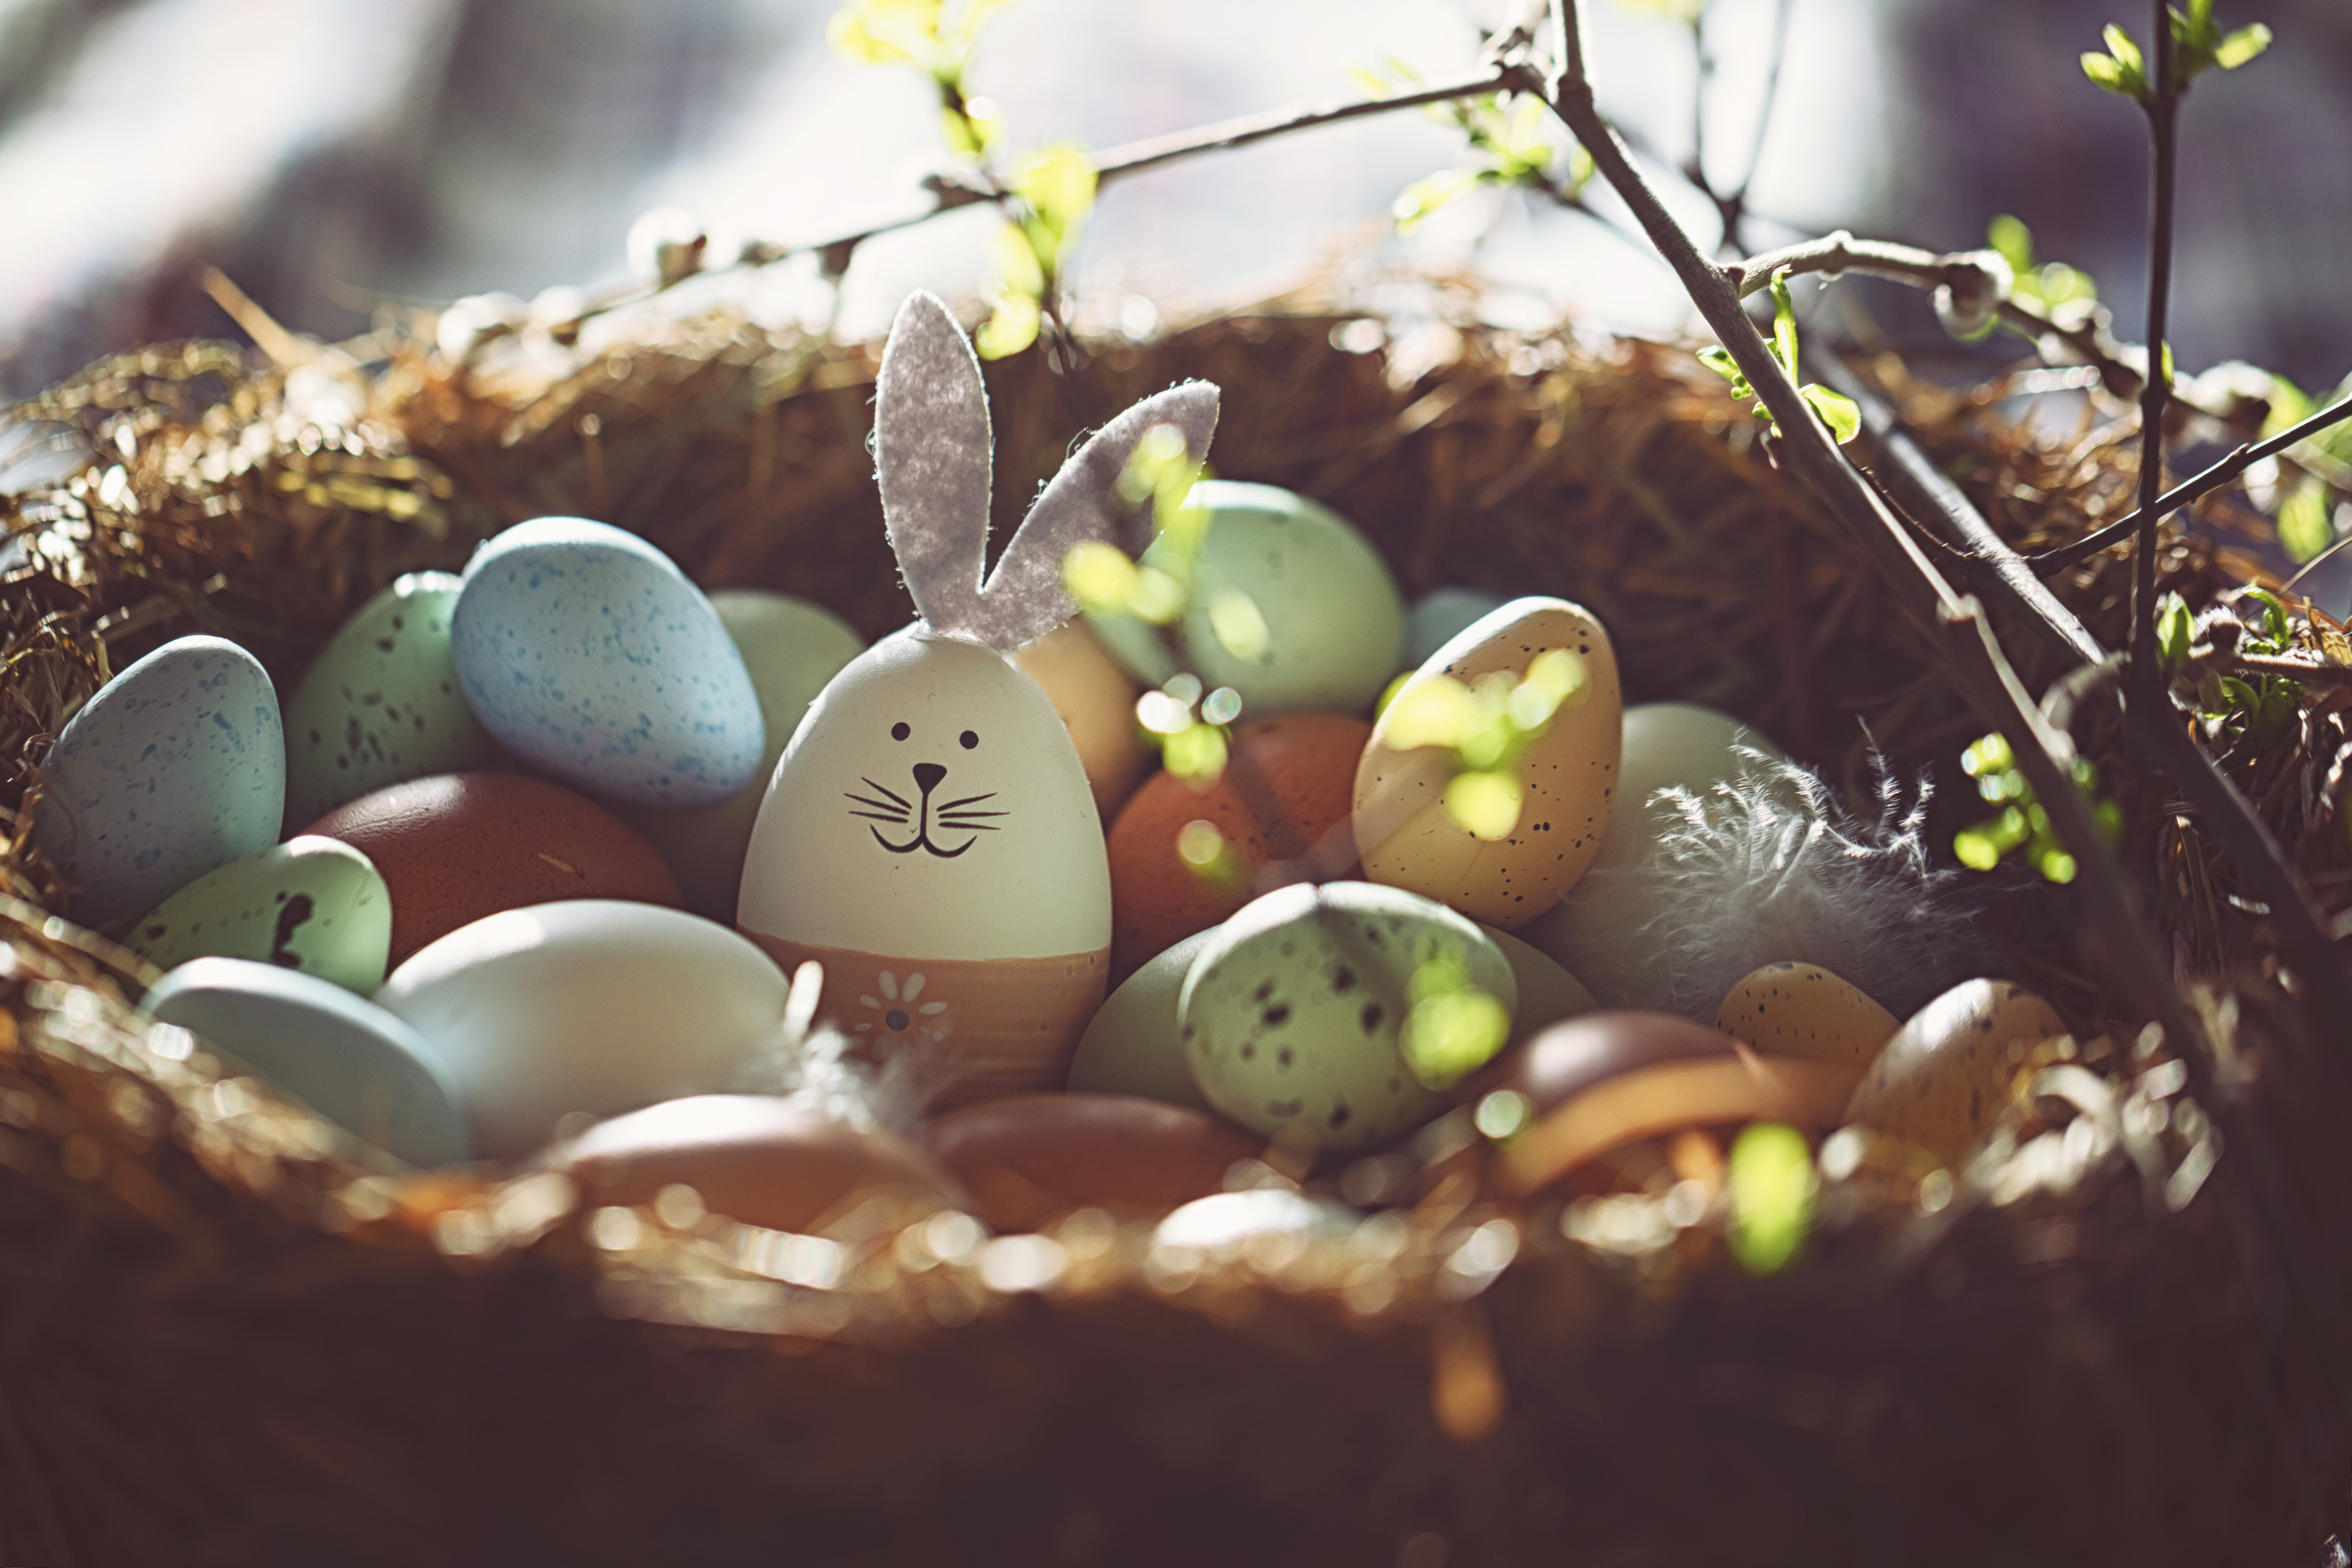 A nest with decorated Easter eggs and one egg with bunny ears and a drawn face